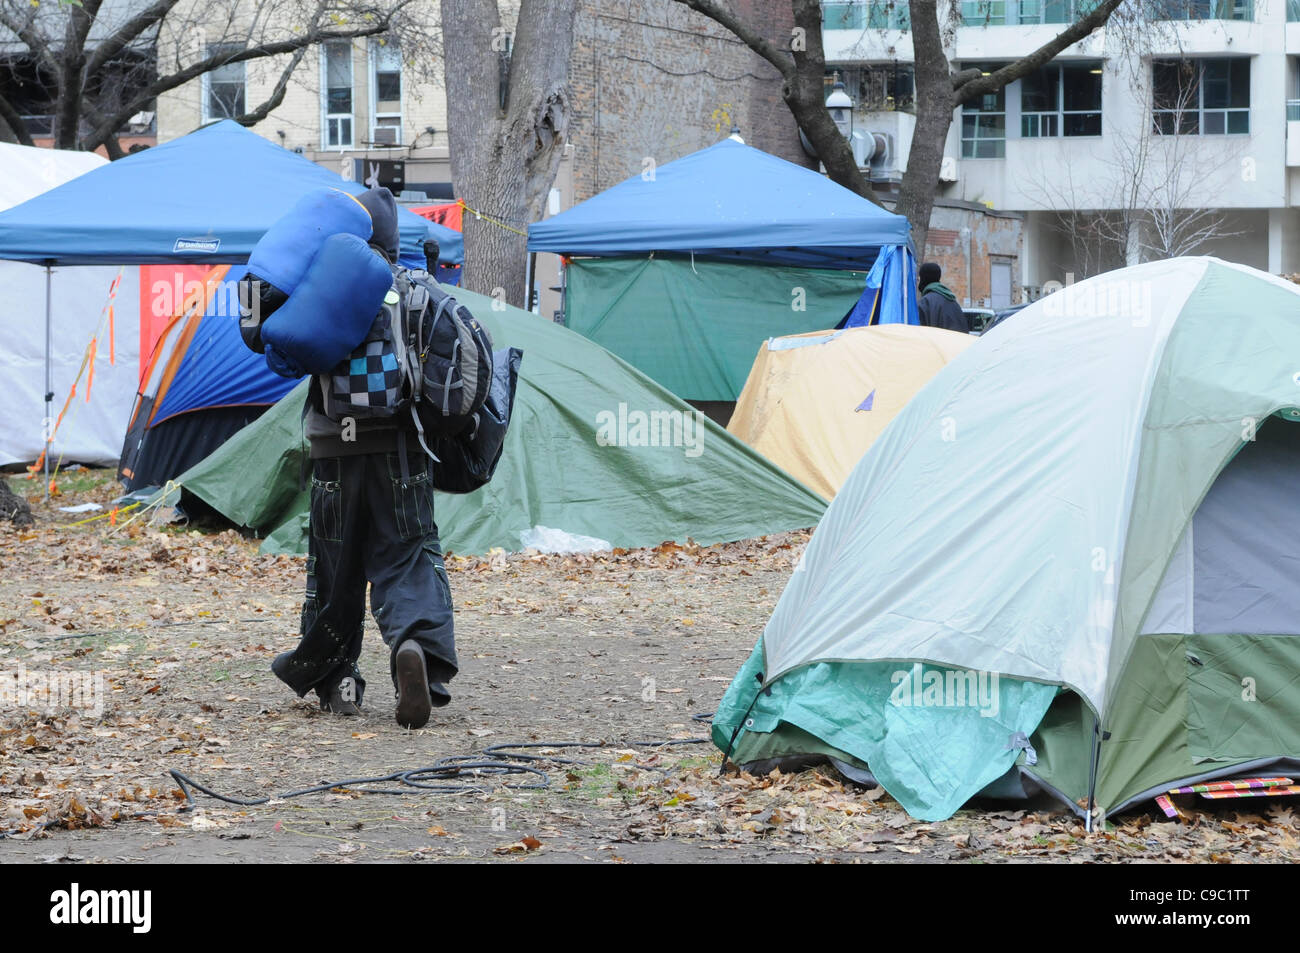 November 21, 2011, one unidentified protester packed up and vacating St. James park following the decision handed down this morning by Ontario Superior Court judge David Brown, upholding the Occupy Toronto tent camp eviction. Stock Photo